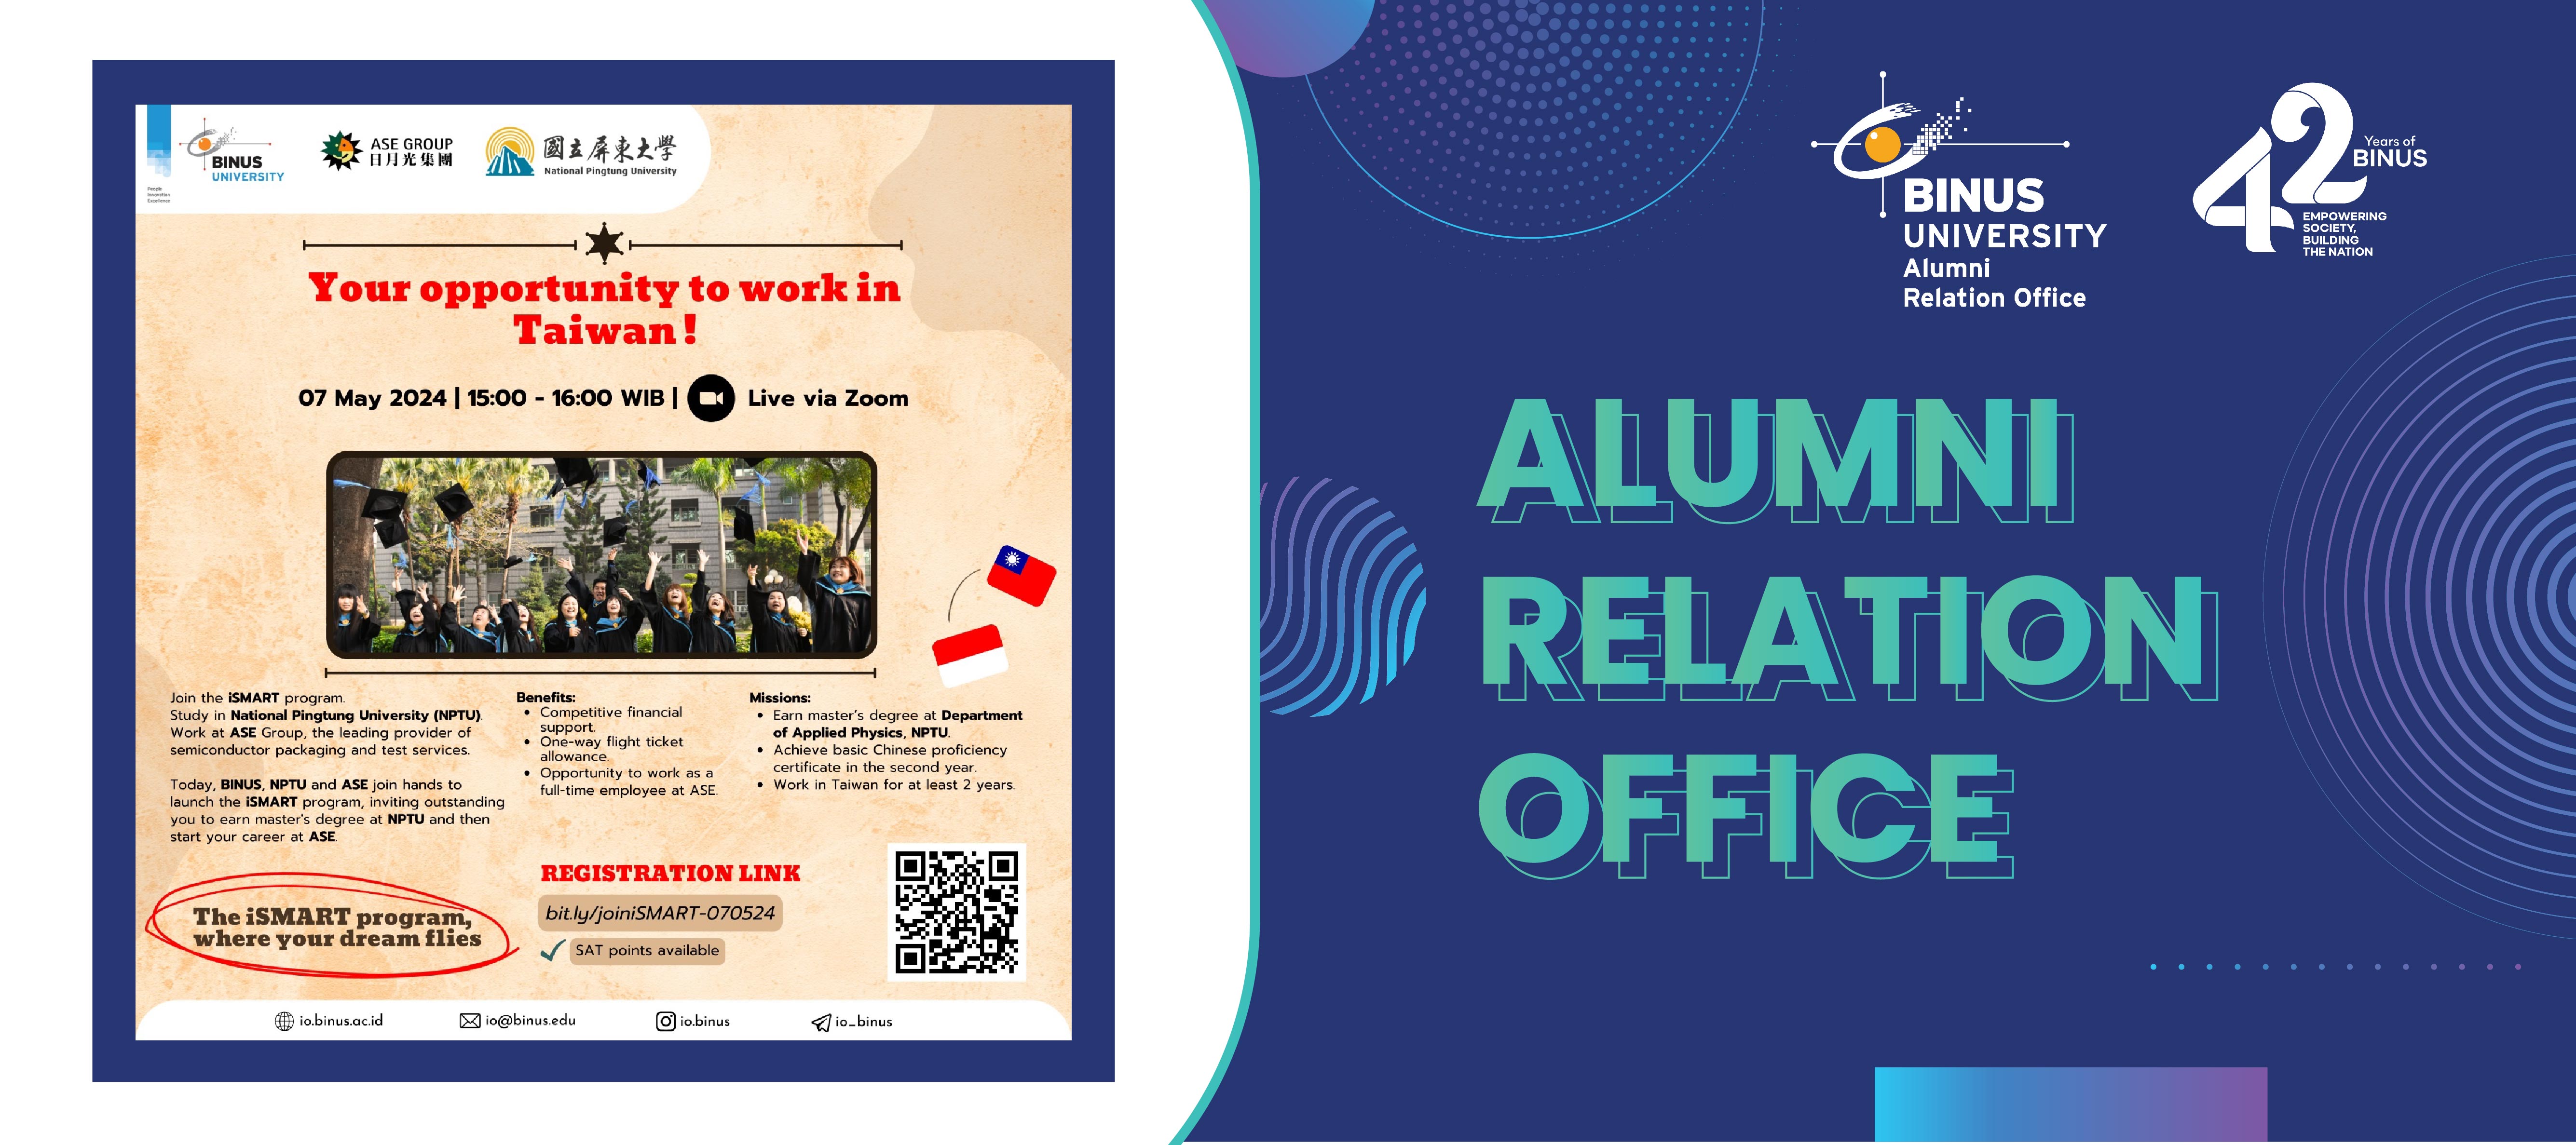 Your opportunity to work in Taiwan